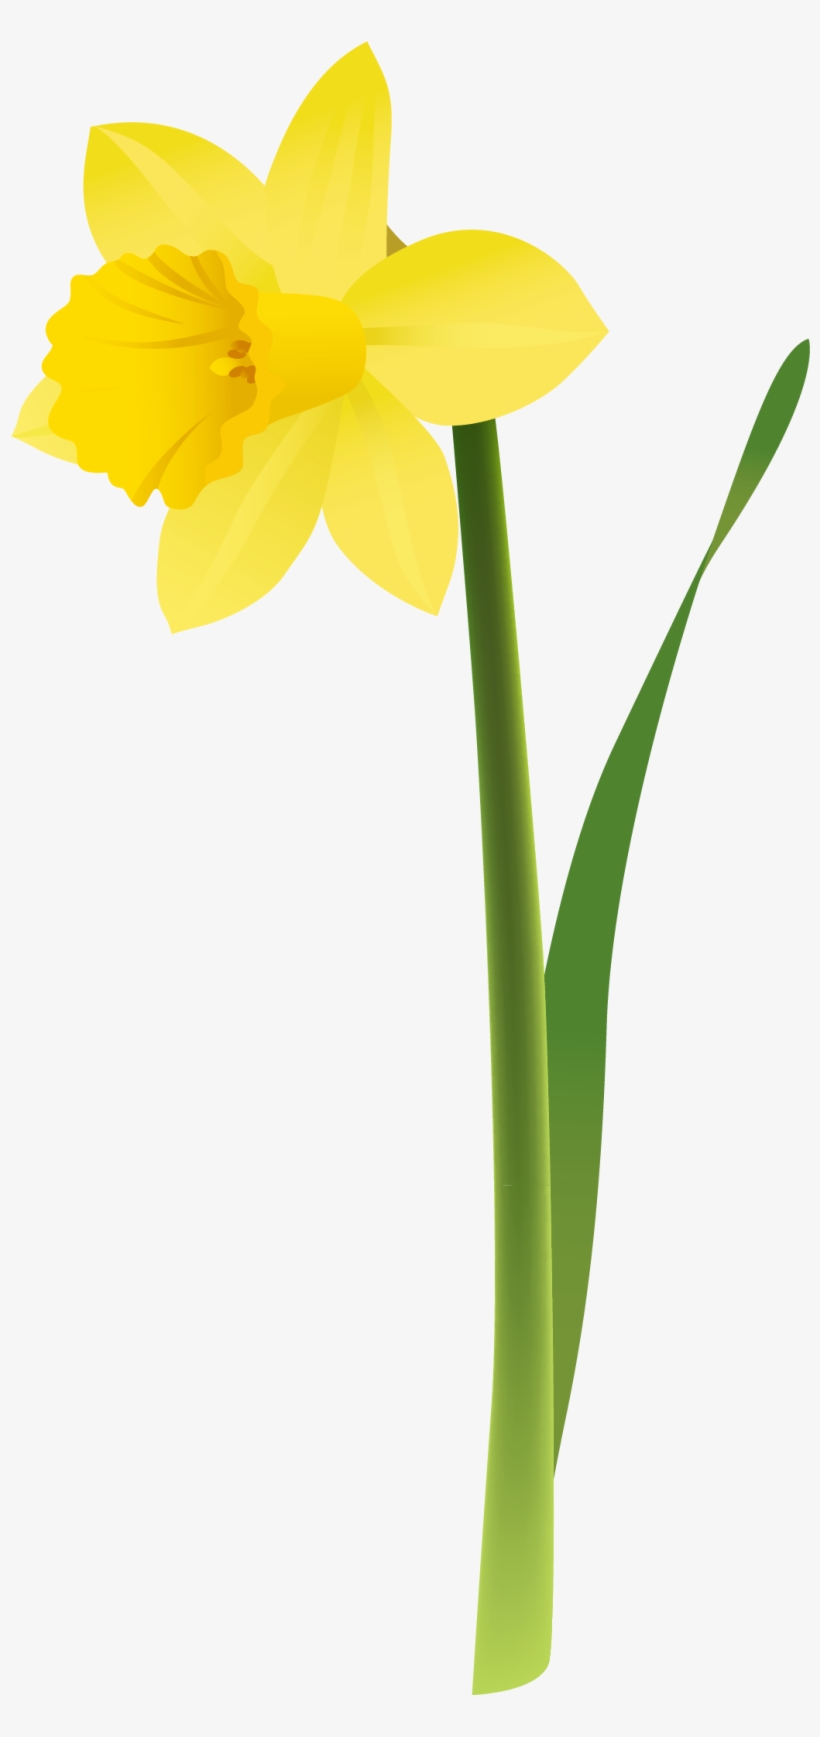 View Full Size - Transparent Background Daffodil Png, transparent png #1034333